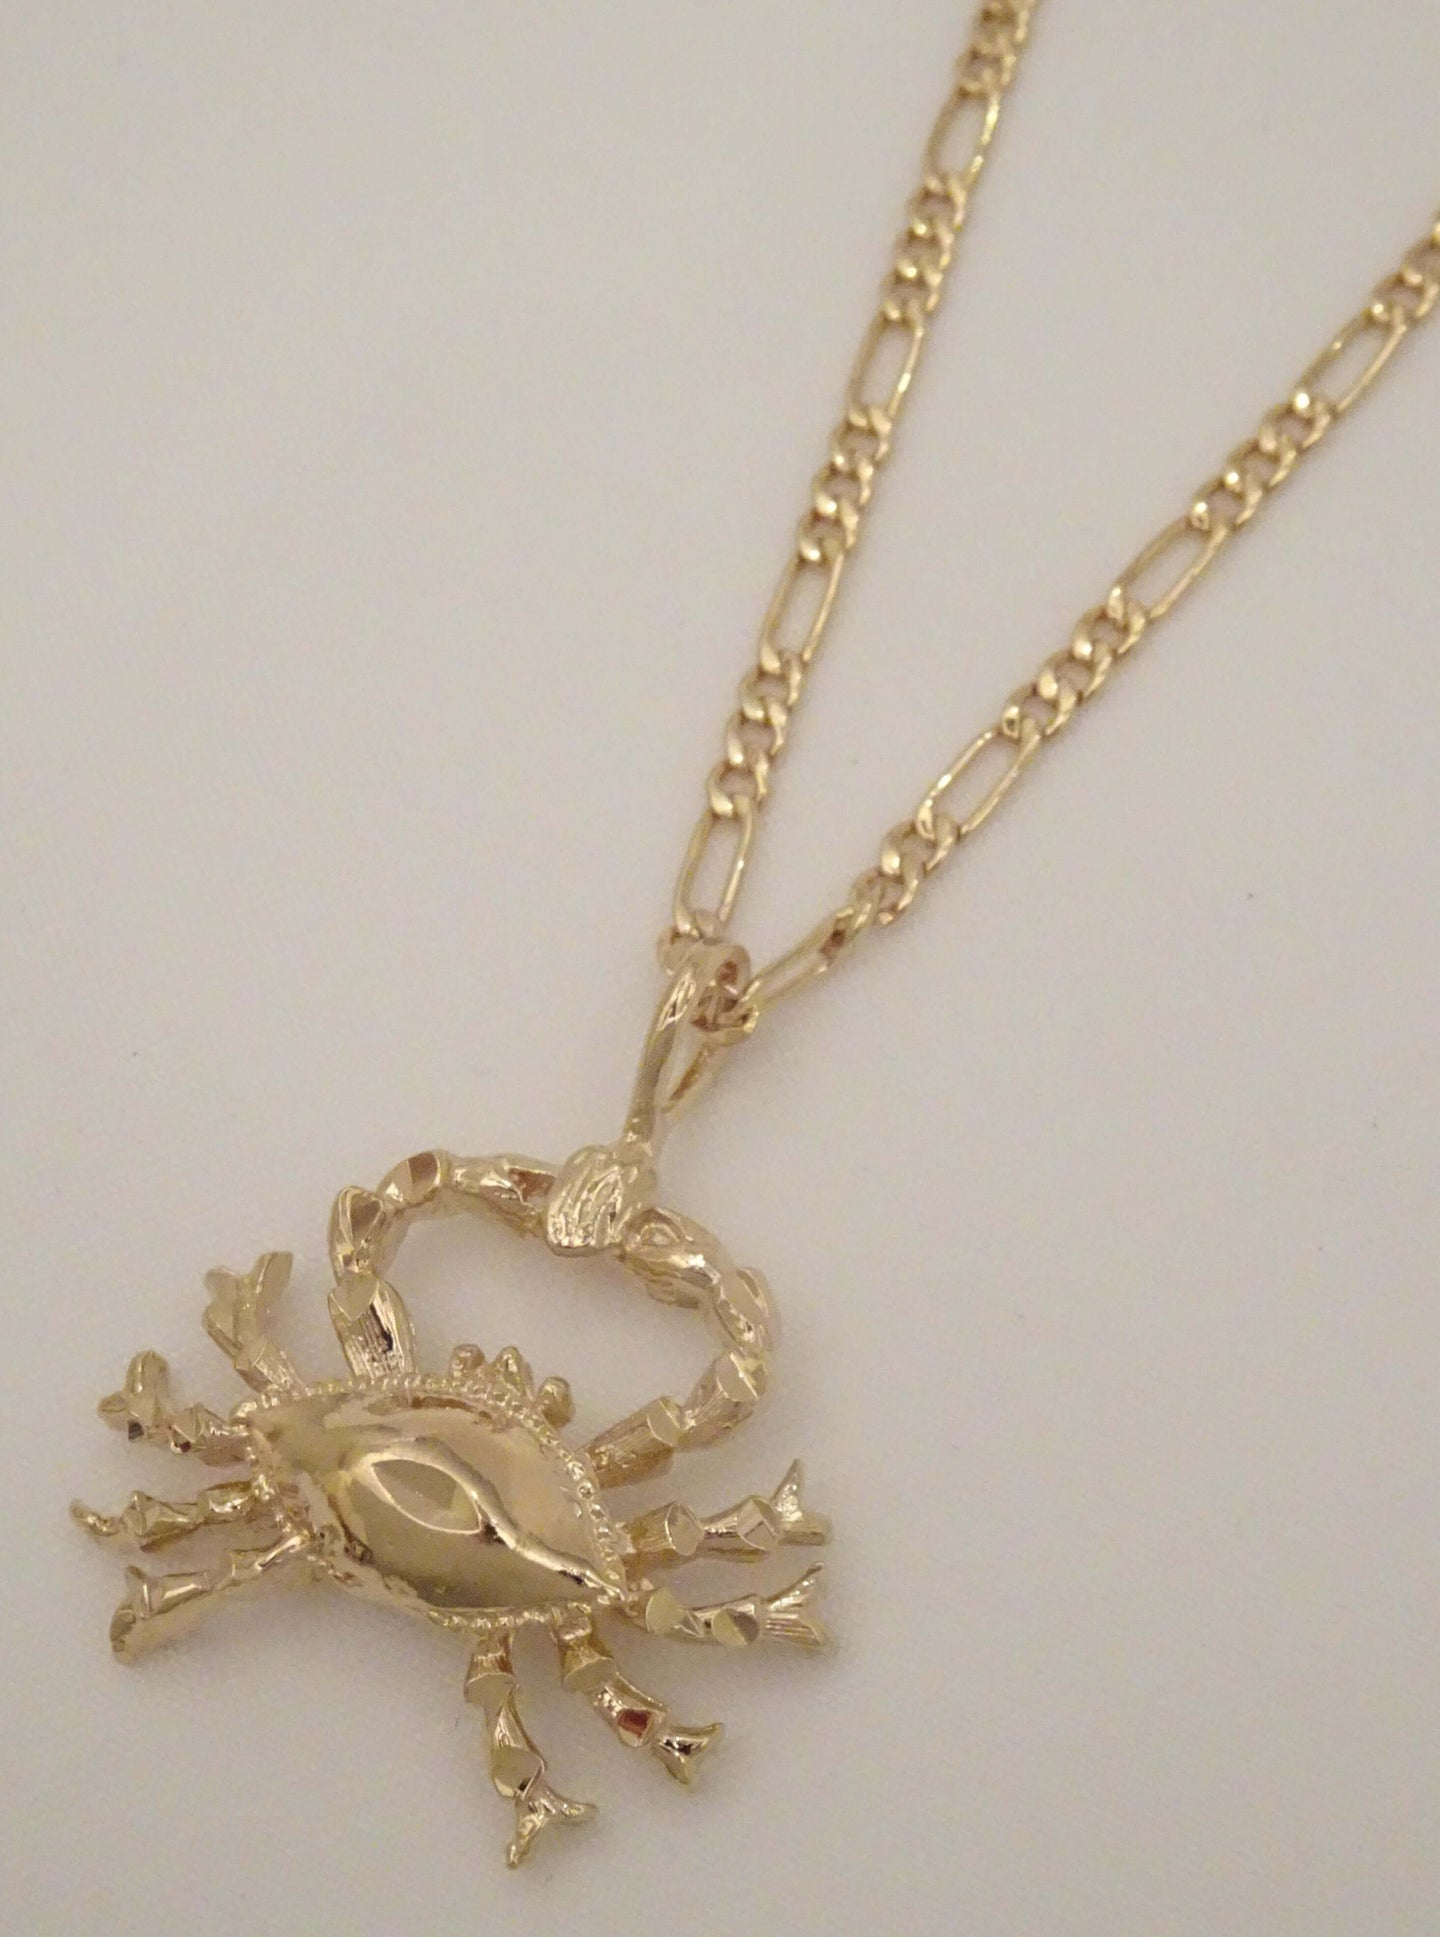 Cancer Zodiac Sign Necklace Horoscope .925 Sterling Silver Yellow Gold  Astrology | eBay